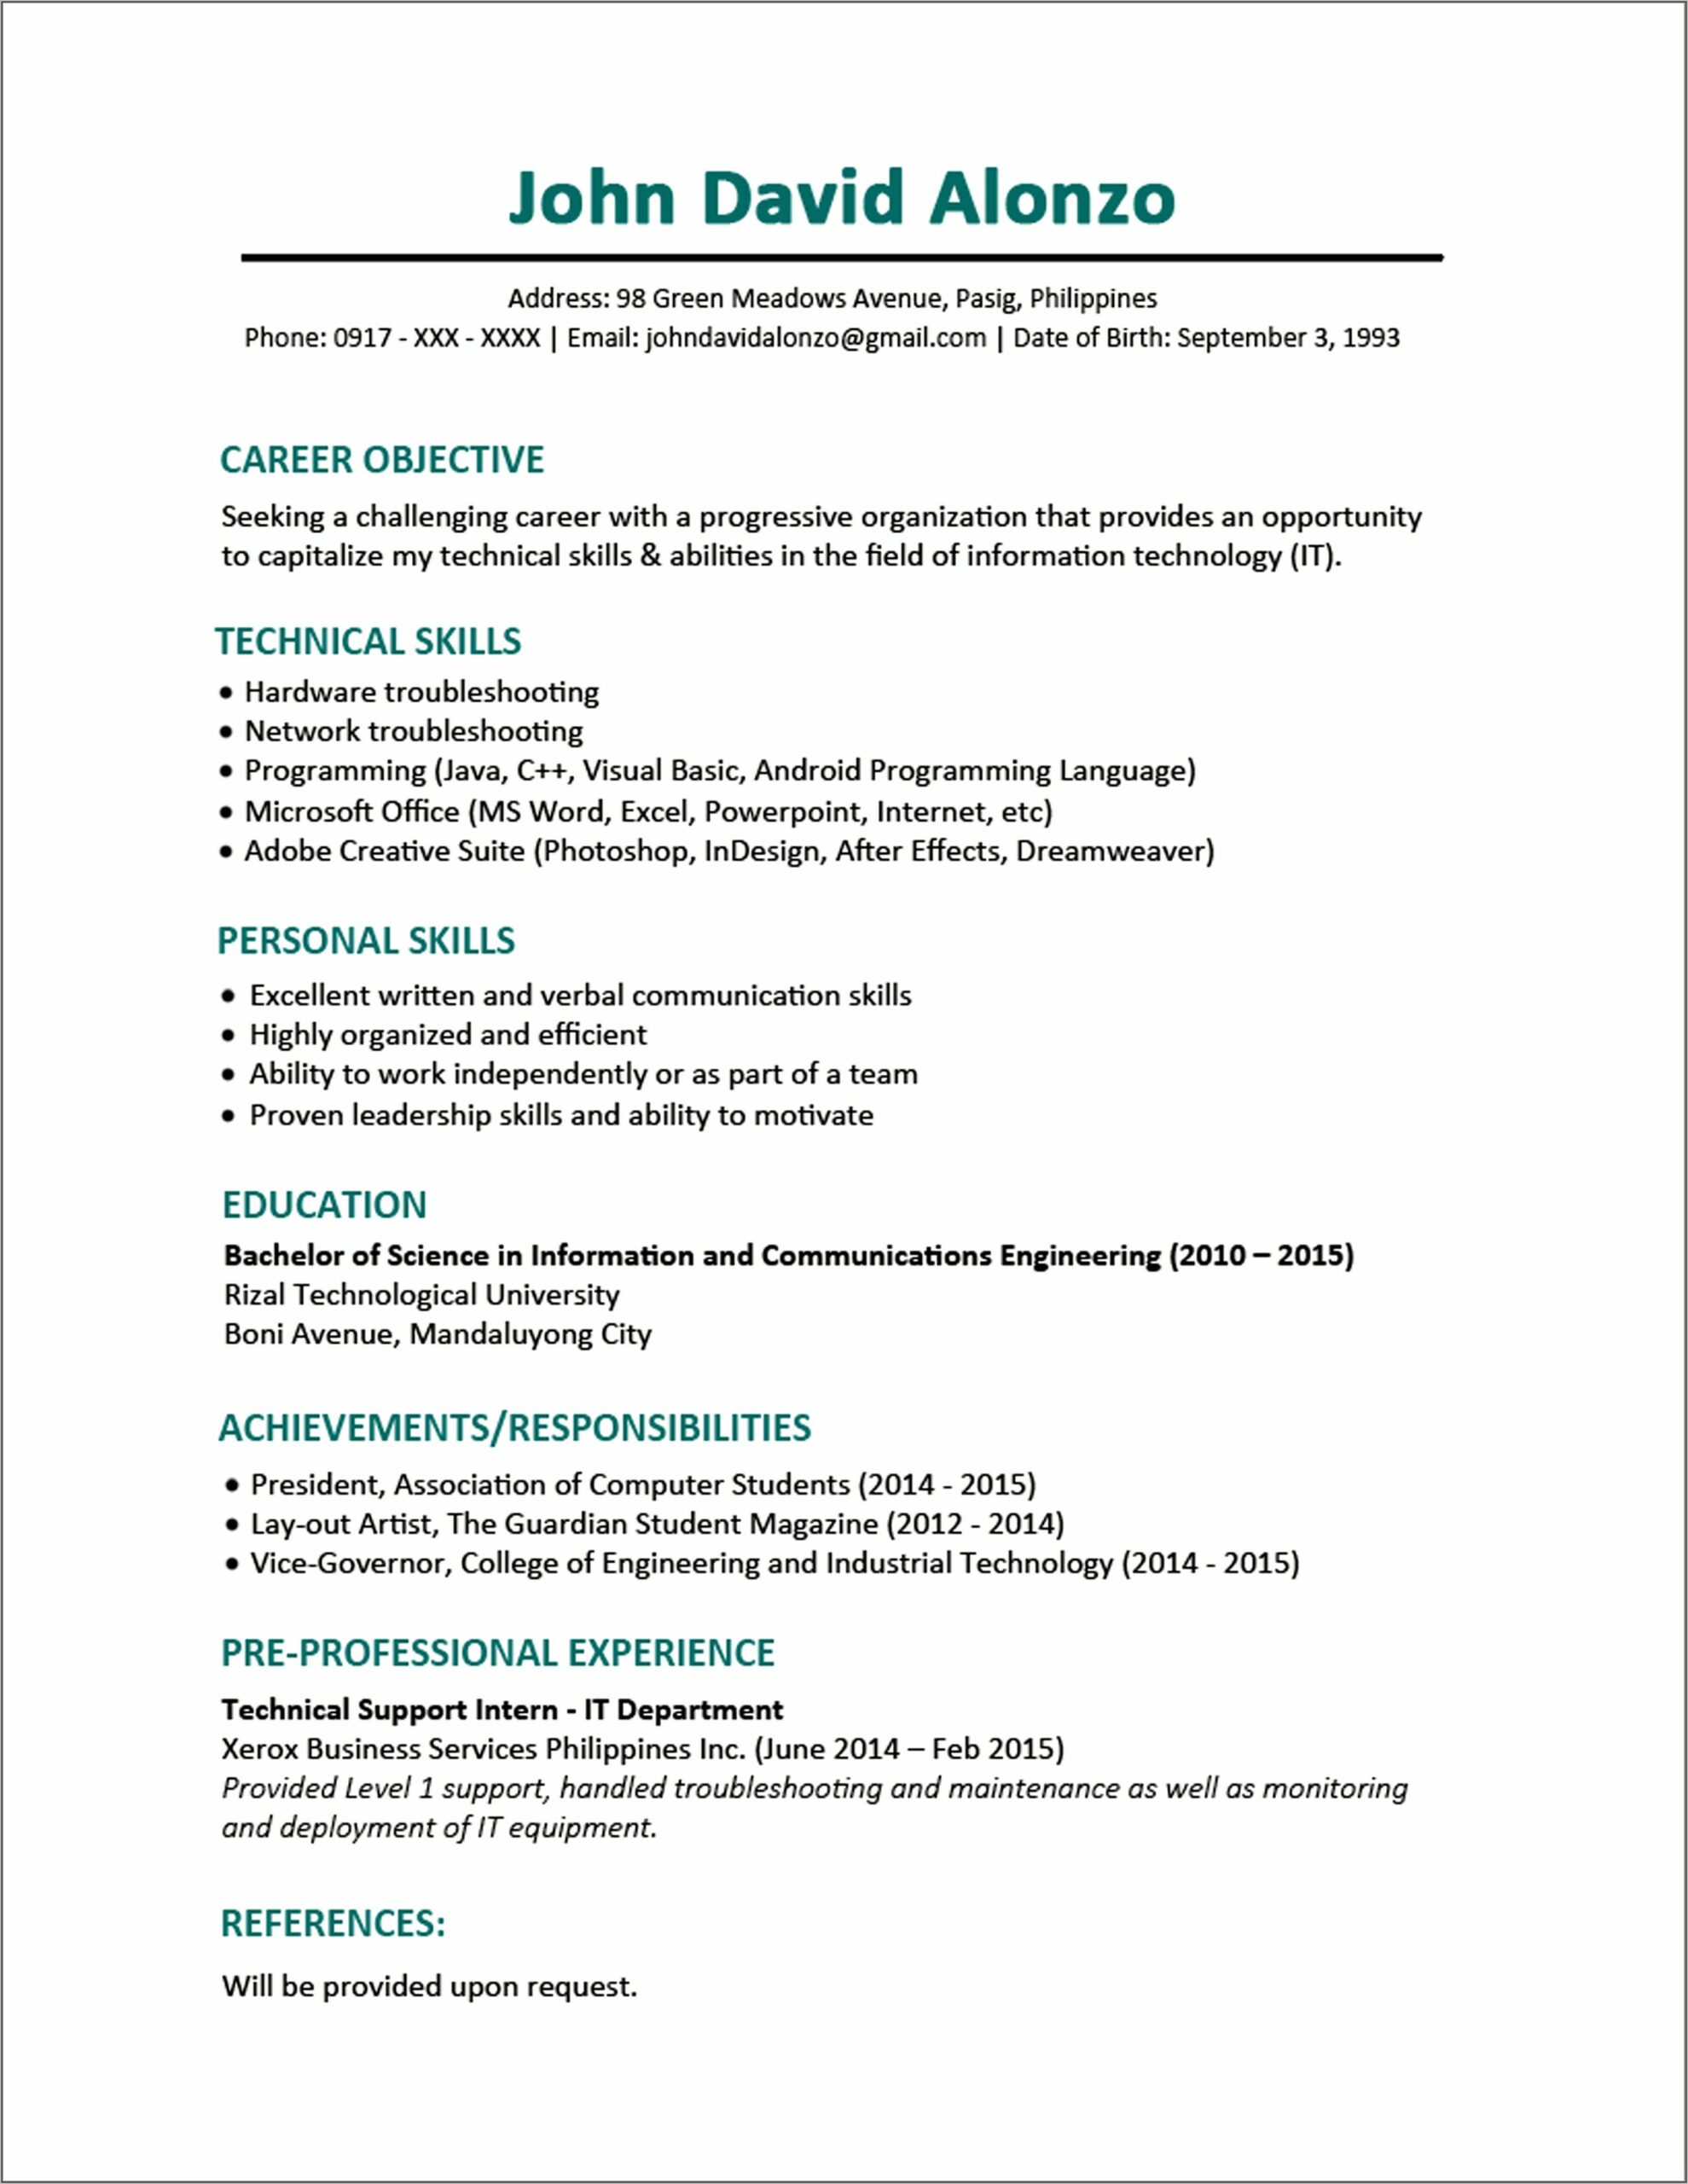 Personal Skills For A Job Resume